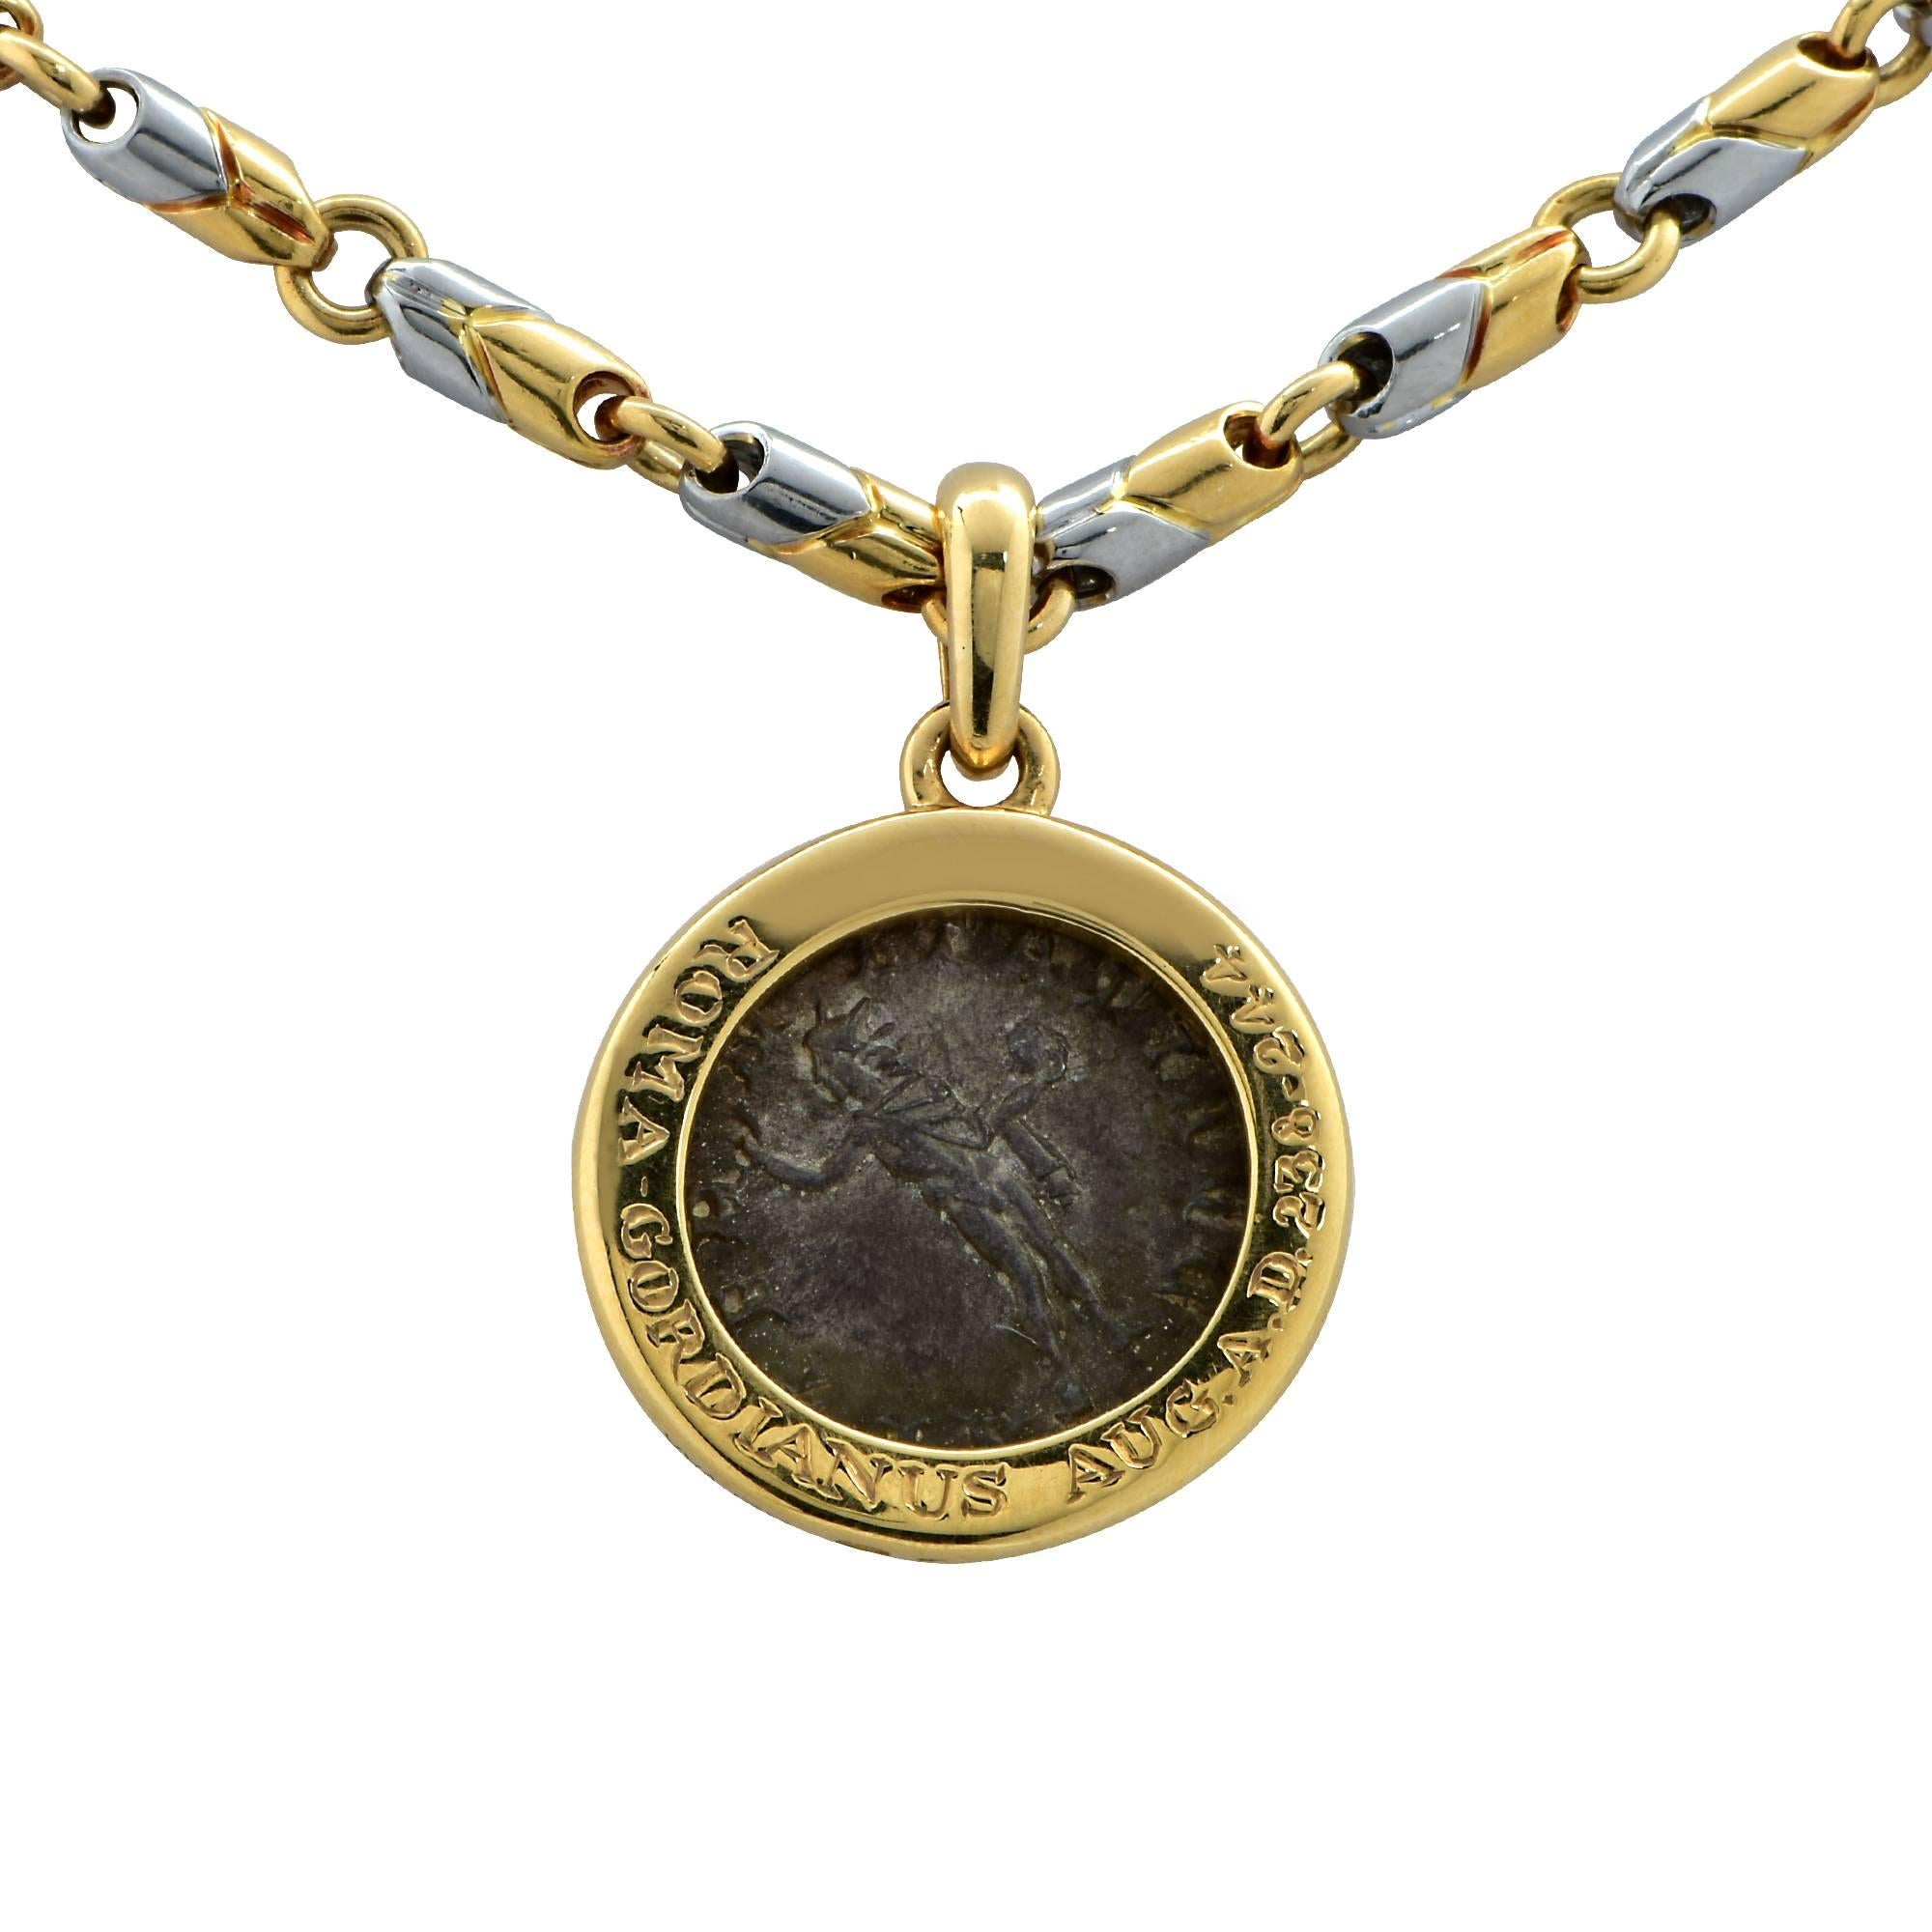 18 Karat Yellow and Stainless Steel Bvlgari chain measuring 20 inches in length, 12.3mm wide, with an ancient Roma Gordianus Aug A.D 238-244 coin set in 18 karat yellow gold, measuring 22.2mm in diameter. 

Our pieces are all accompanied by an